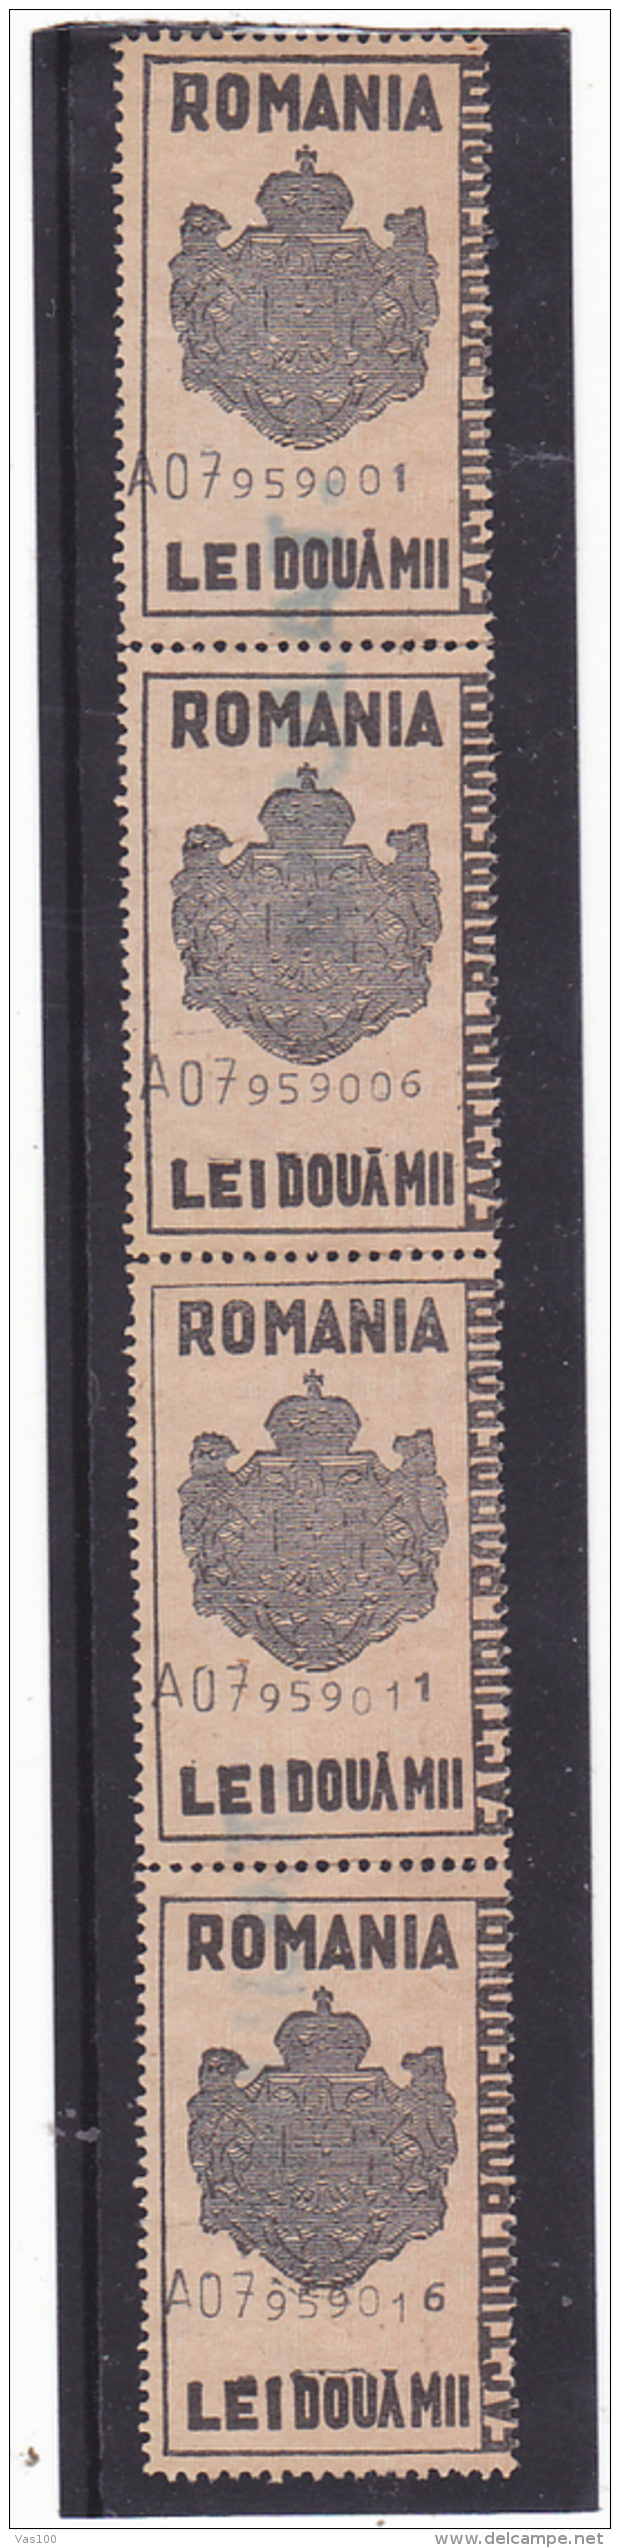 #200  JUDICIAL STAMPS, REVENUE STAMP, COAT OF ARMS, 2 000 LEI,  FOUR STAMPS, ROMANIA. - Fiscale Zegels